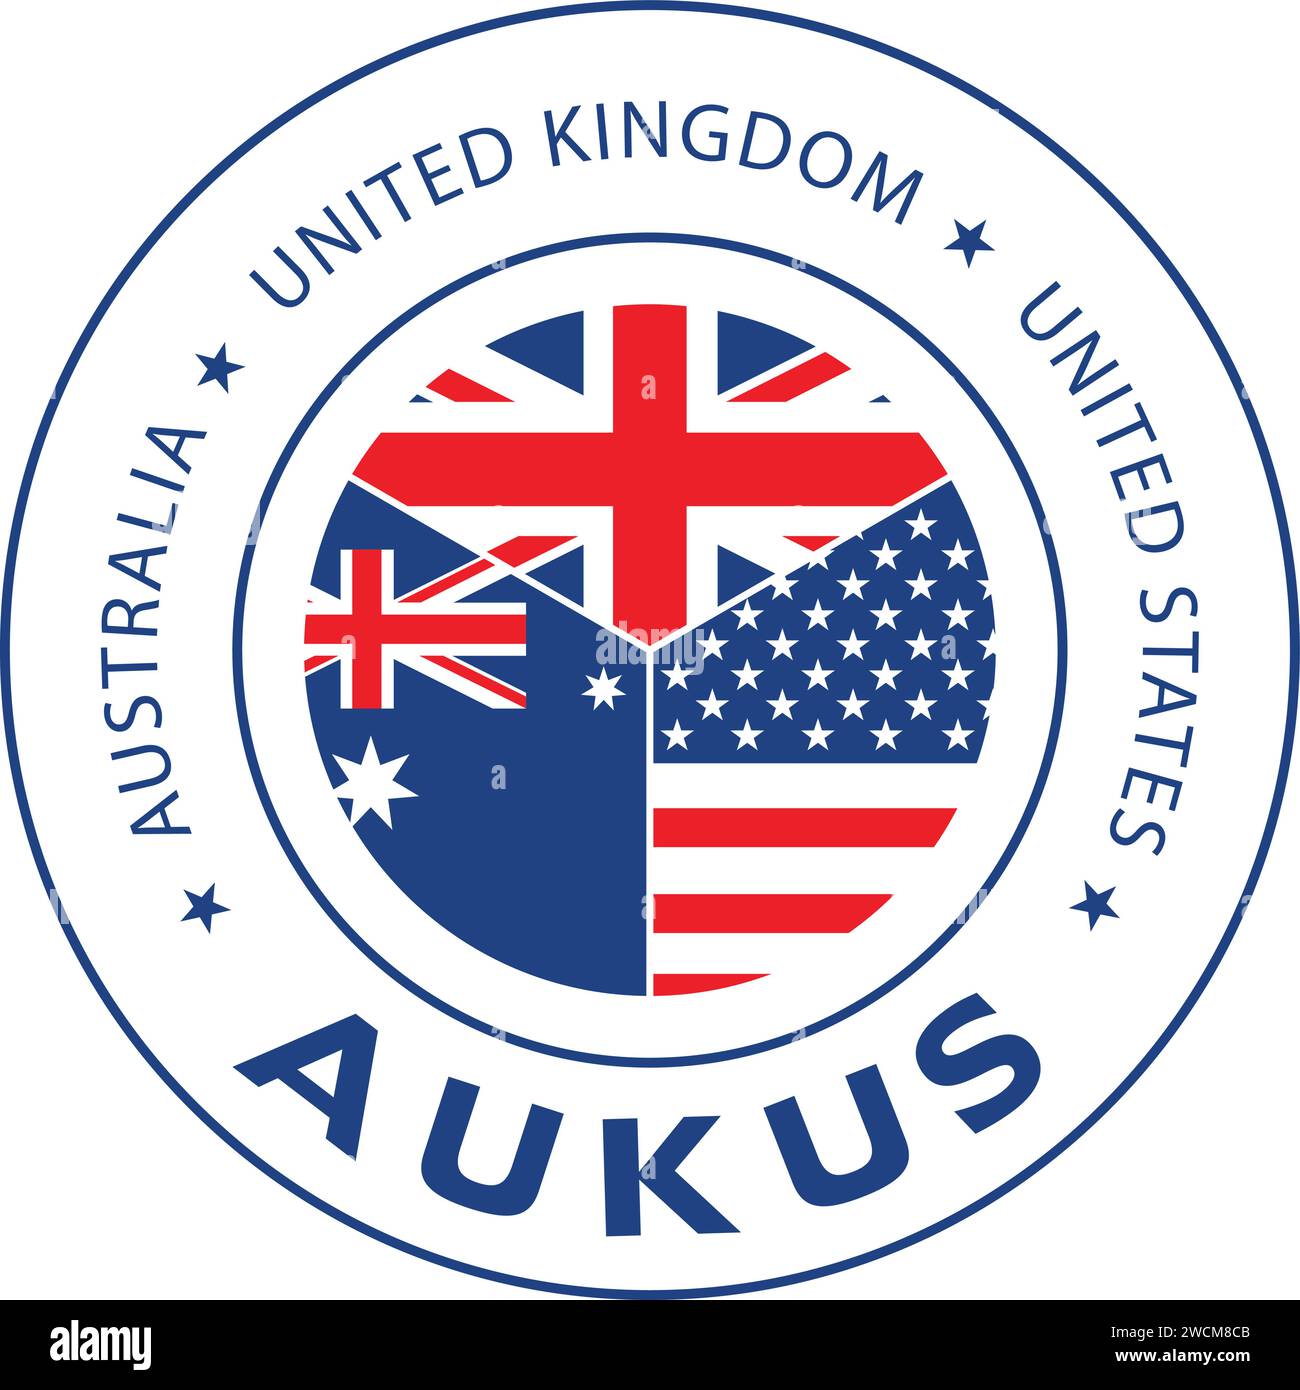 Aukus alliance logo, trilateral security partnership for the Indo-Pacific region, vector illustration Stock Vector